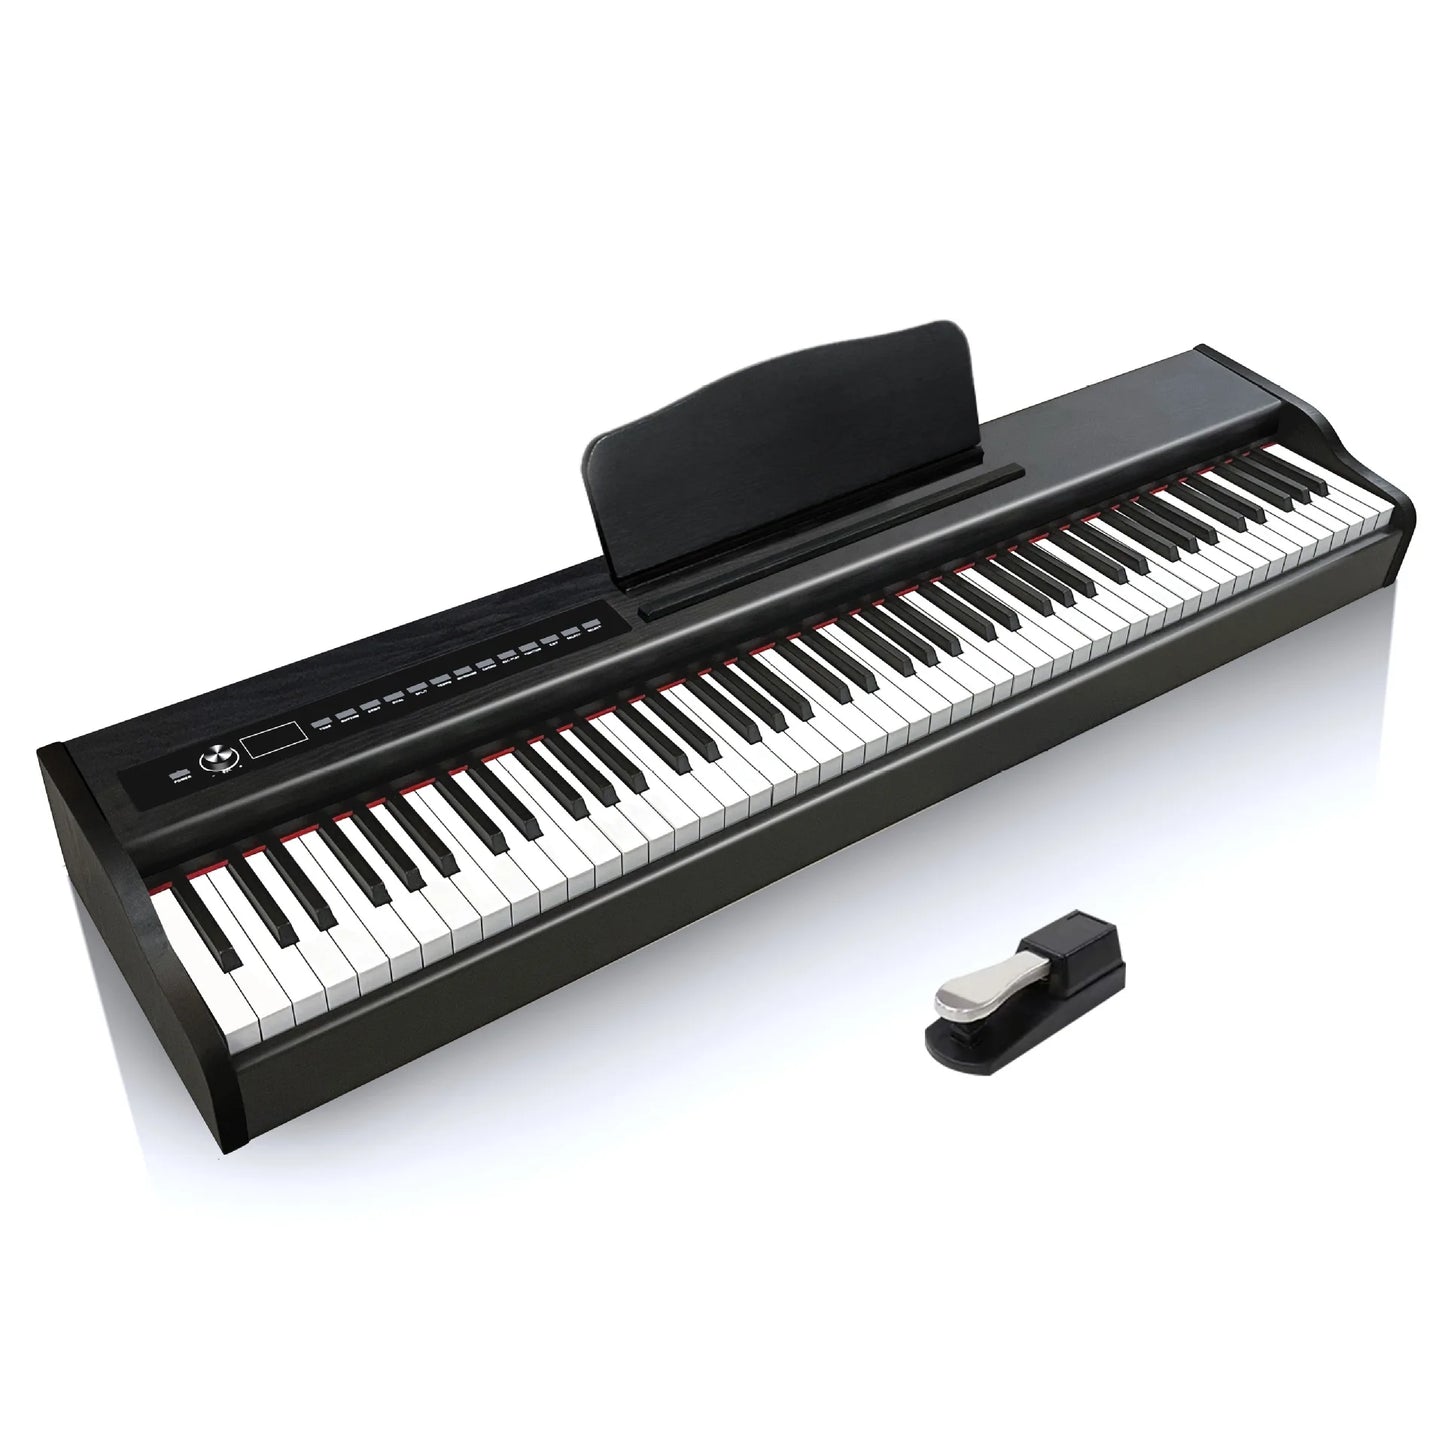 World Control Musical Keyboard Stand Automatic Musical Digital Electronic Piano 88 Key Weighted Teclado Piano Midi Device